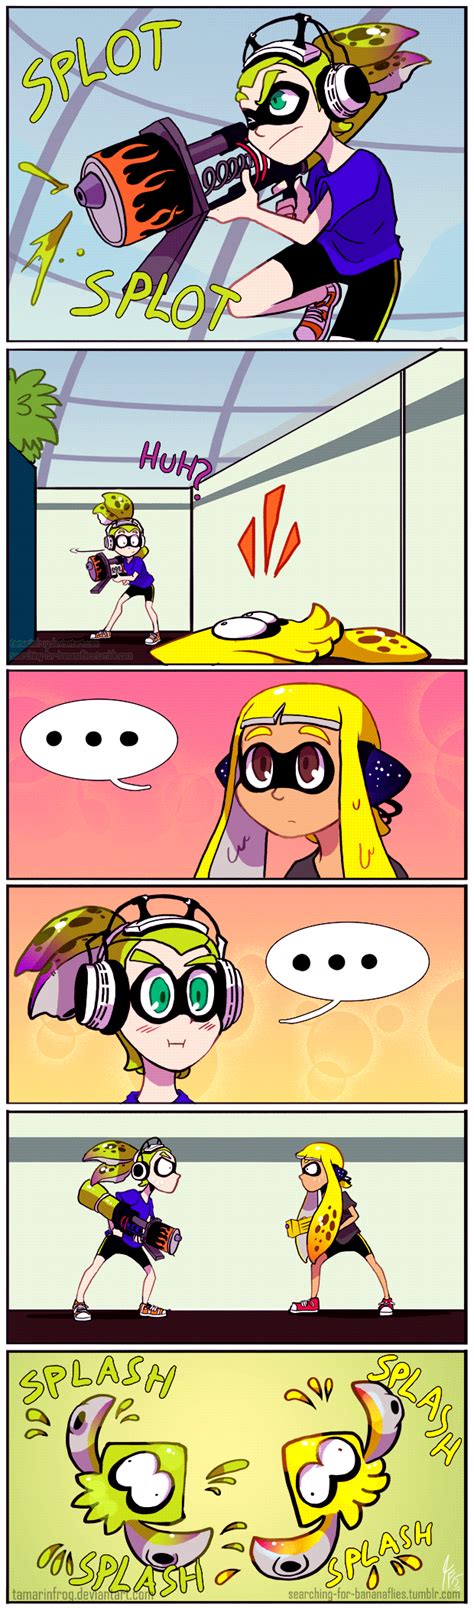 Inkling Inkling Girl And Inkling Boy Splatoon And More Drawn By